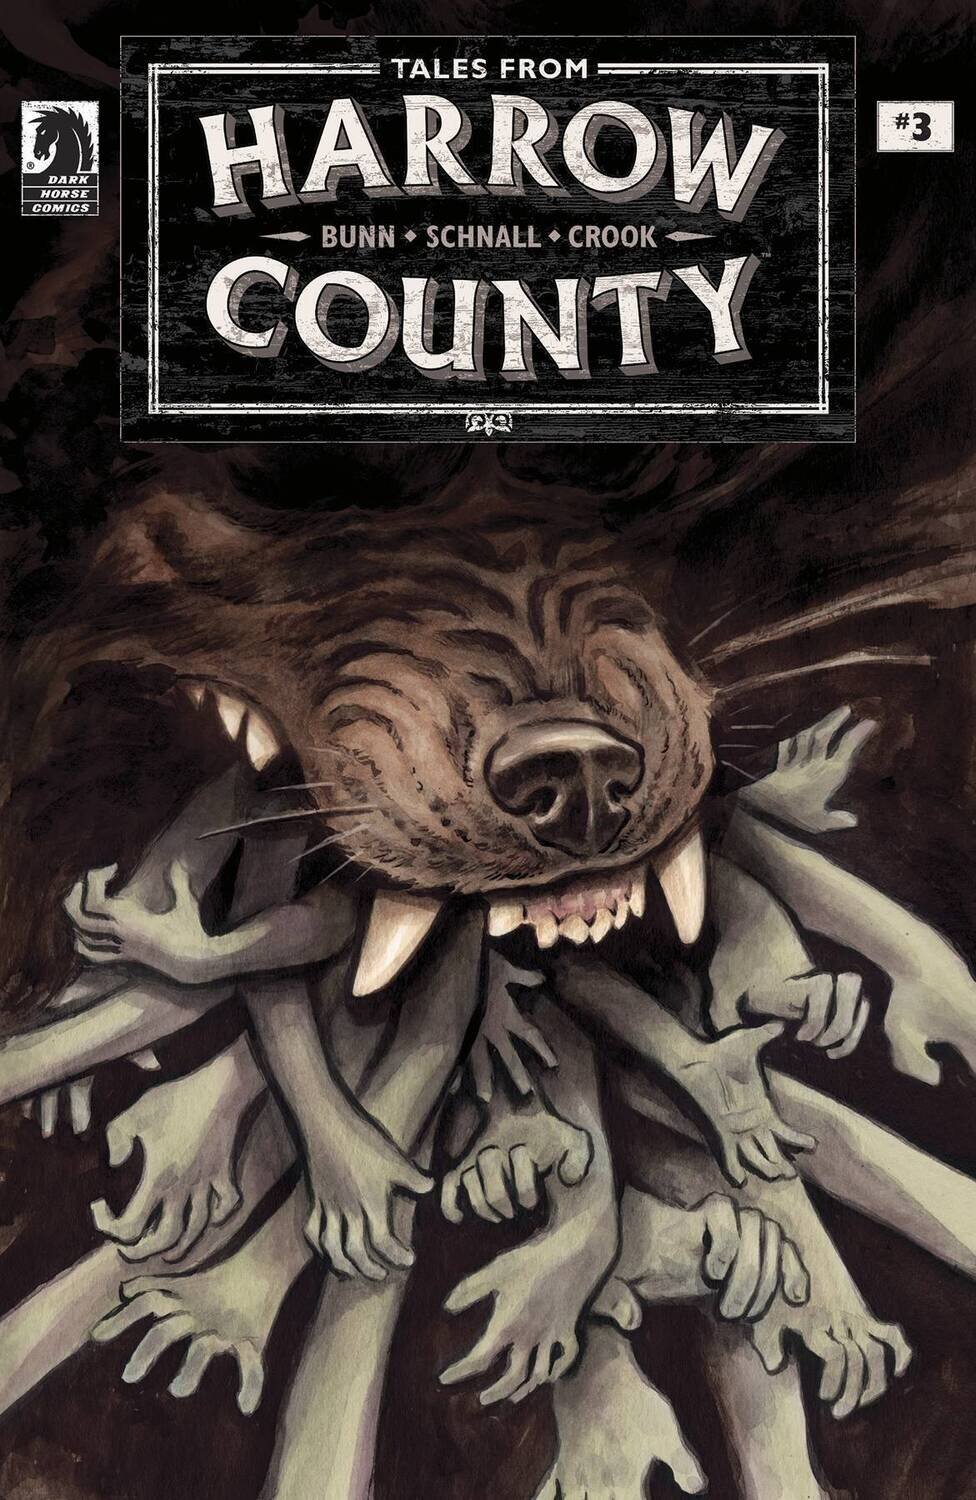 TALES FROM HARROW COUNTY LOST ONES #3 (OF 4) CVR A SCHNALL